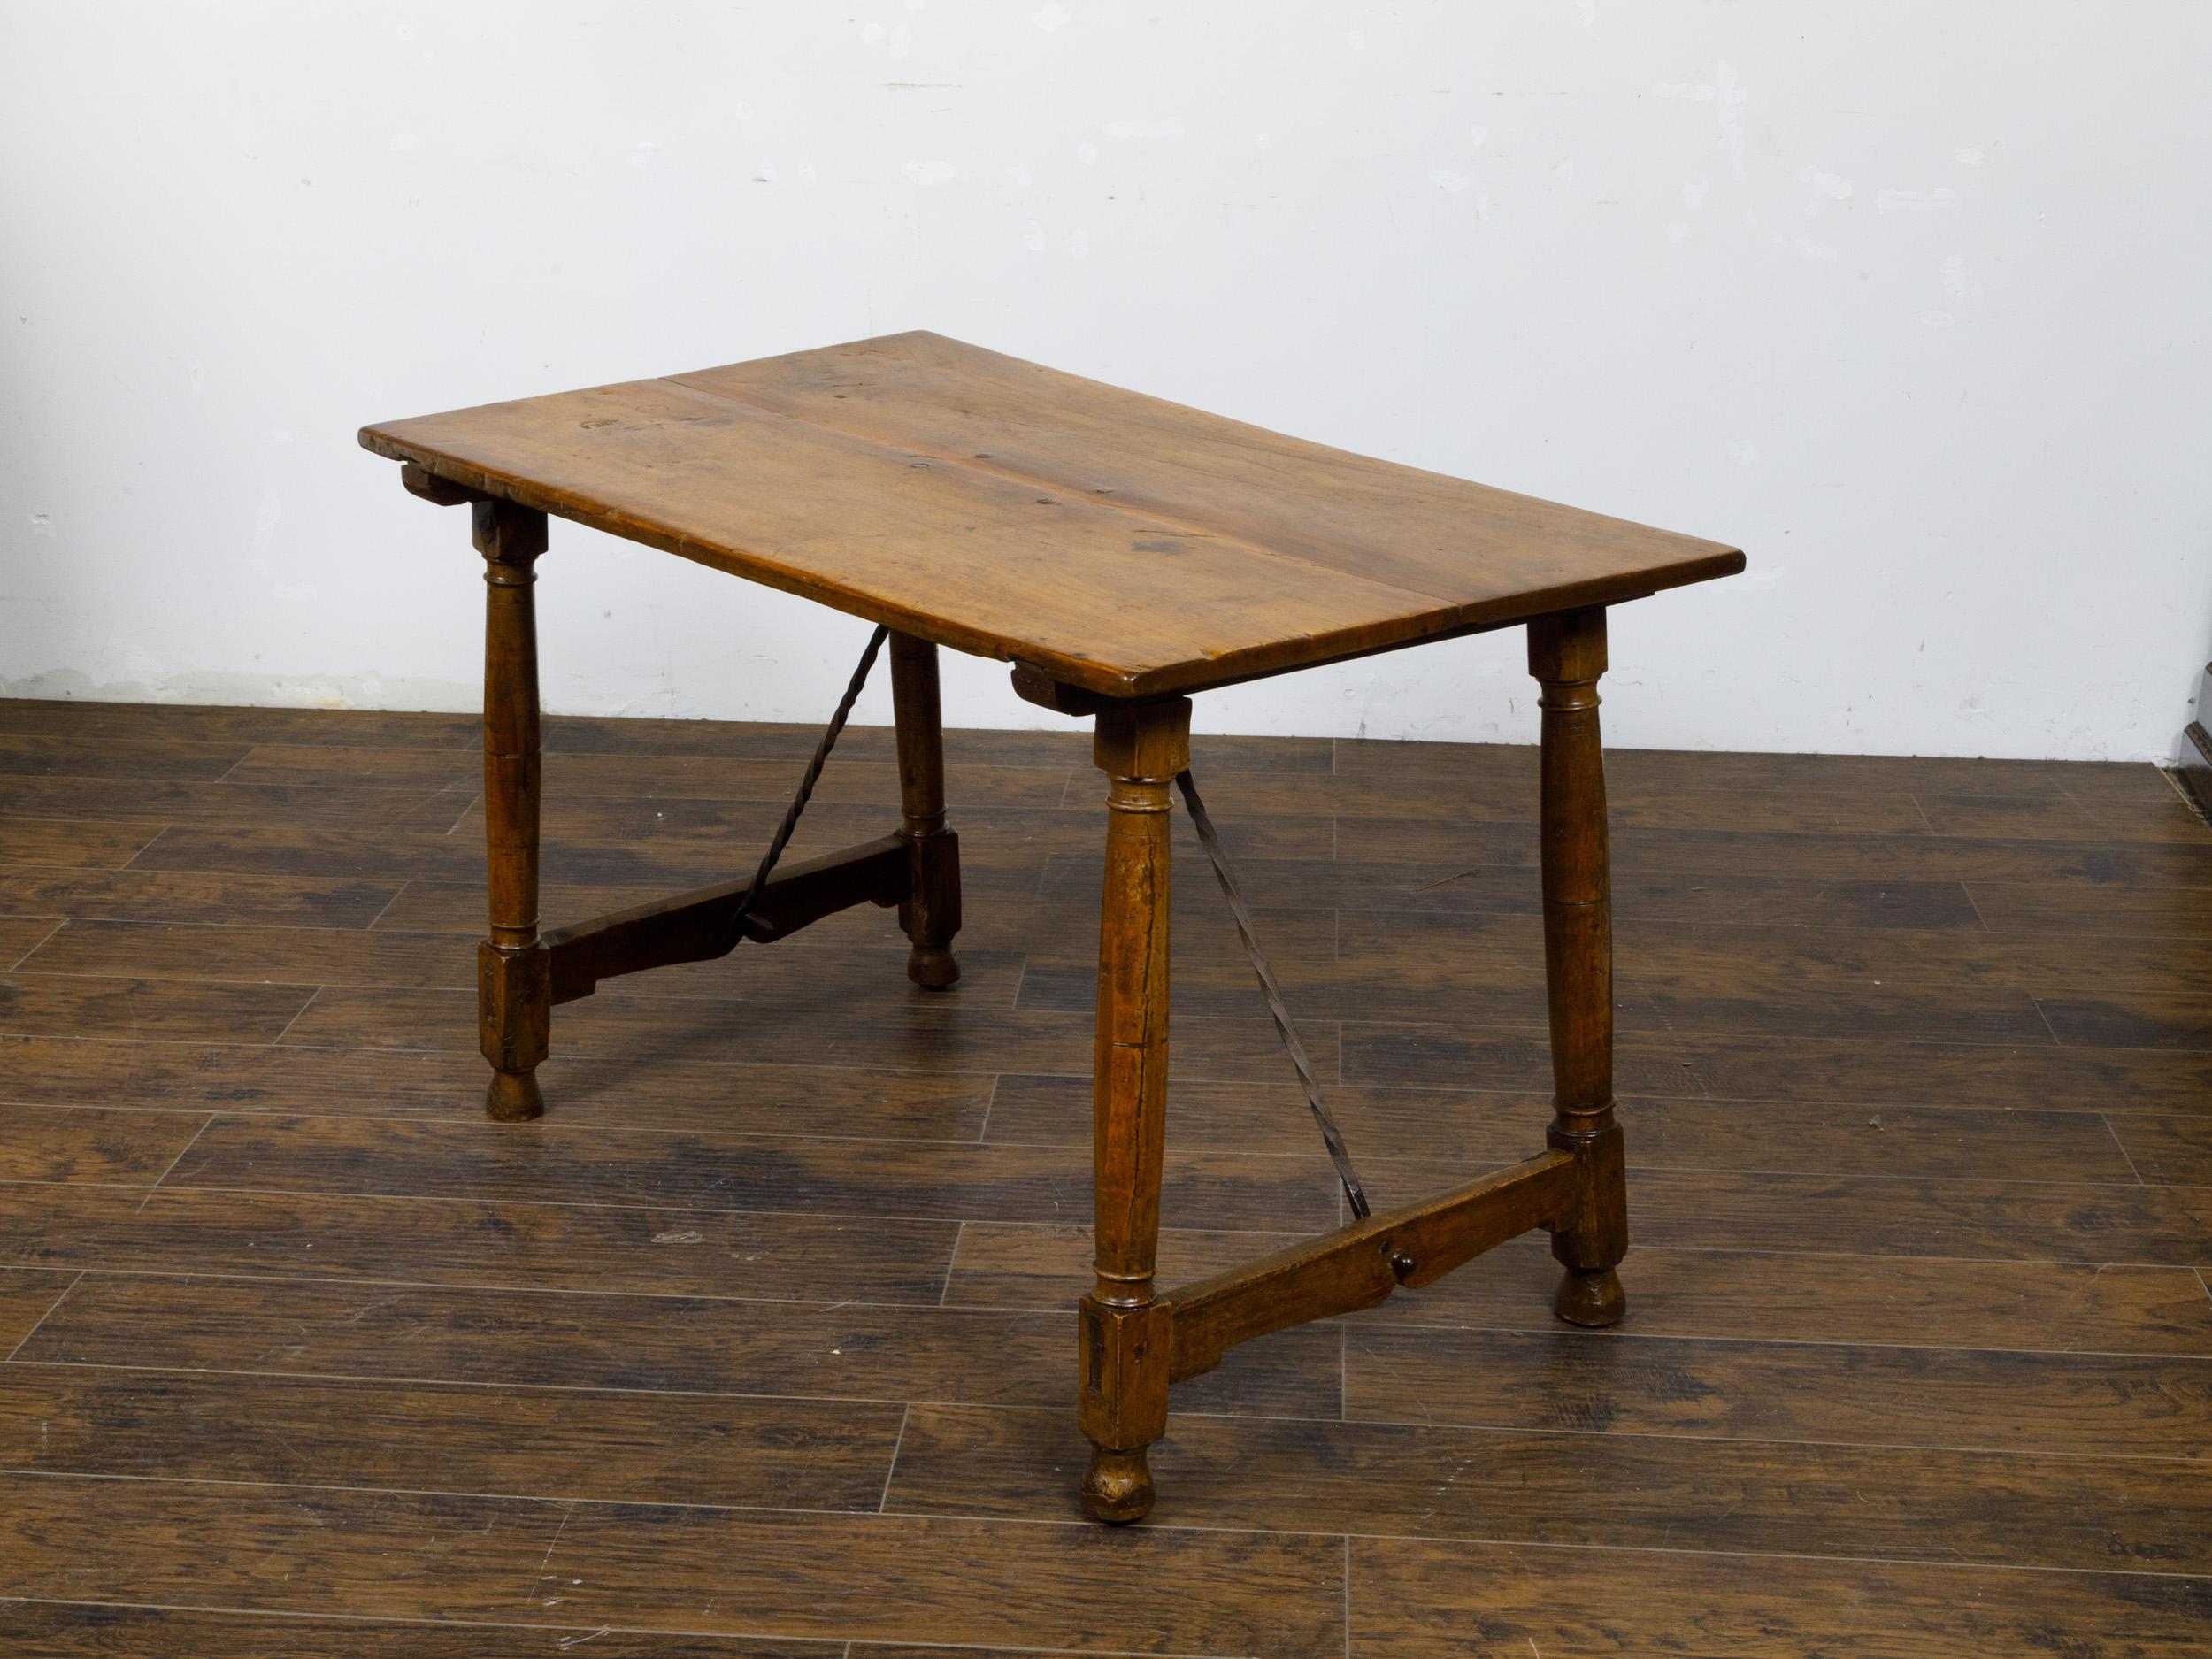 Italian 19th Century Walnut Console Table with Column Legs and Iron Stretchers For Sale 3